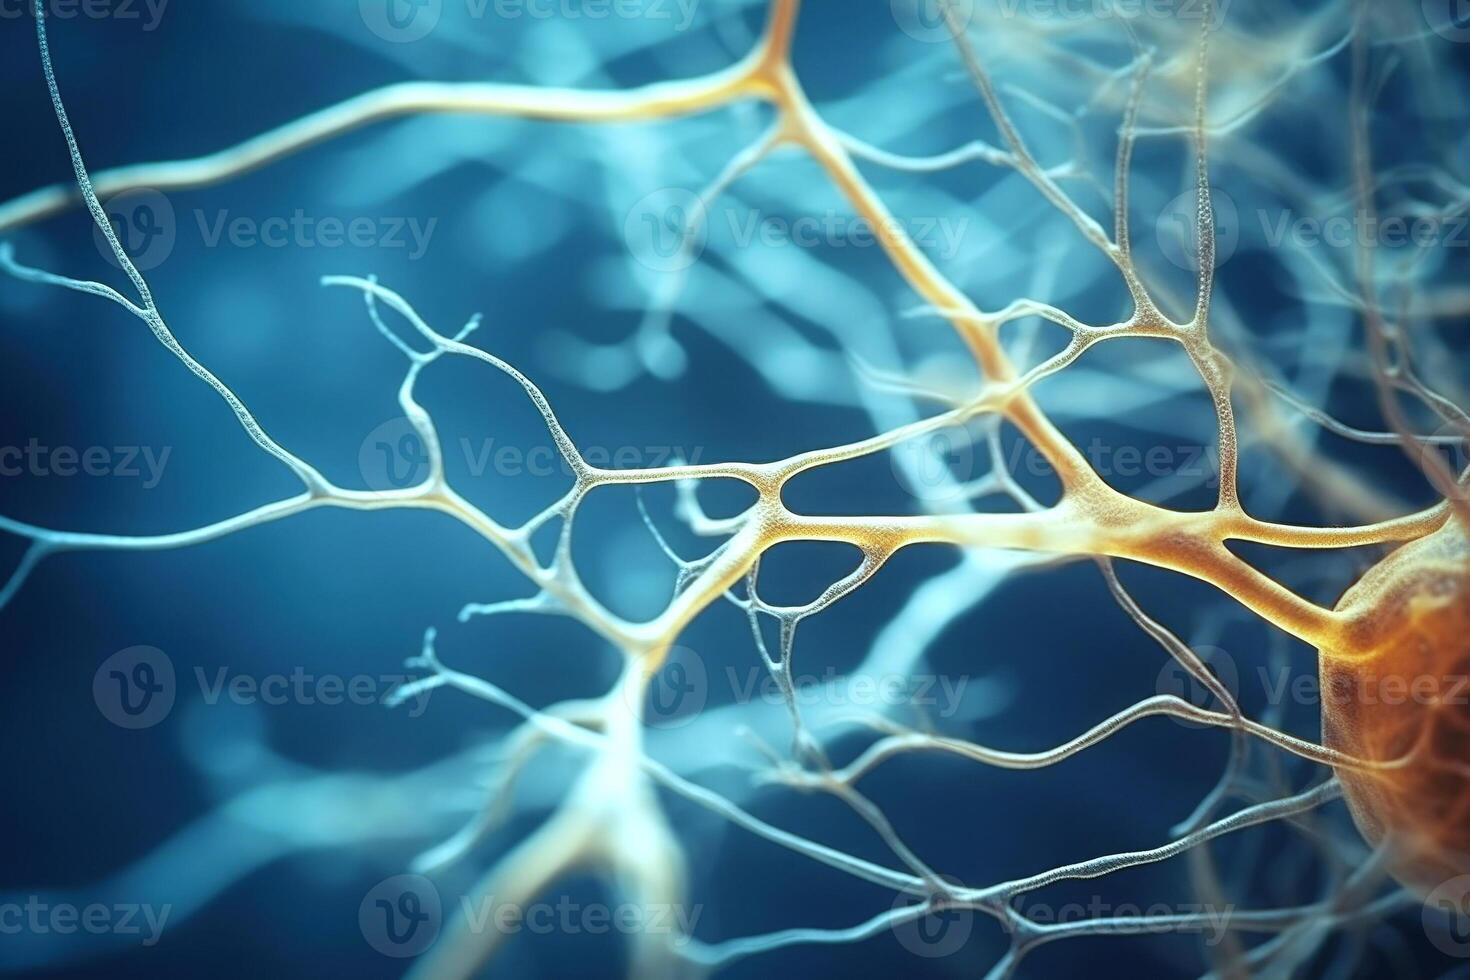 Neuron cells with glowing connections on abstract background. photo